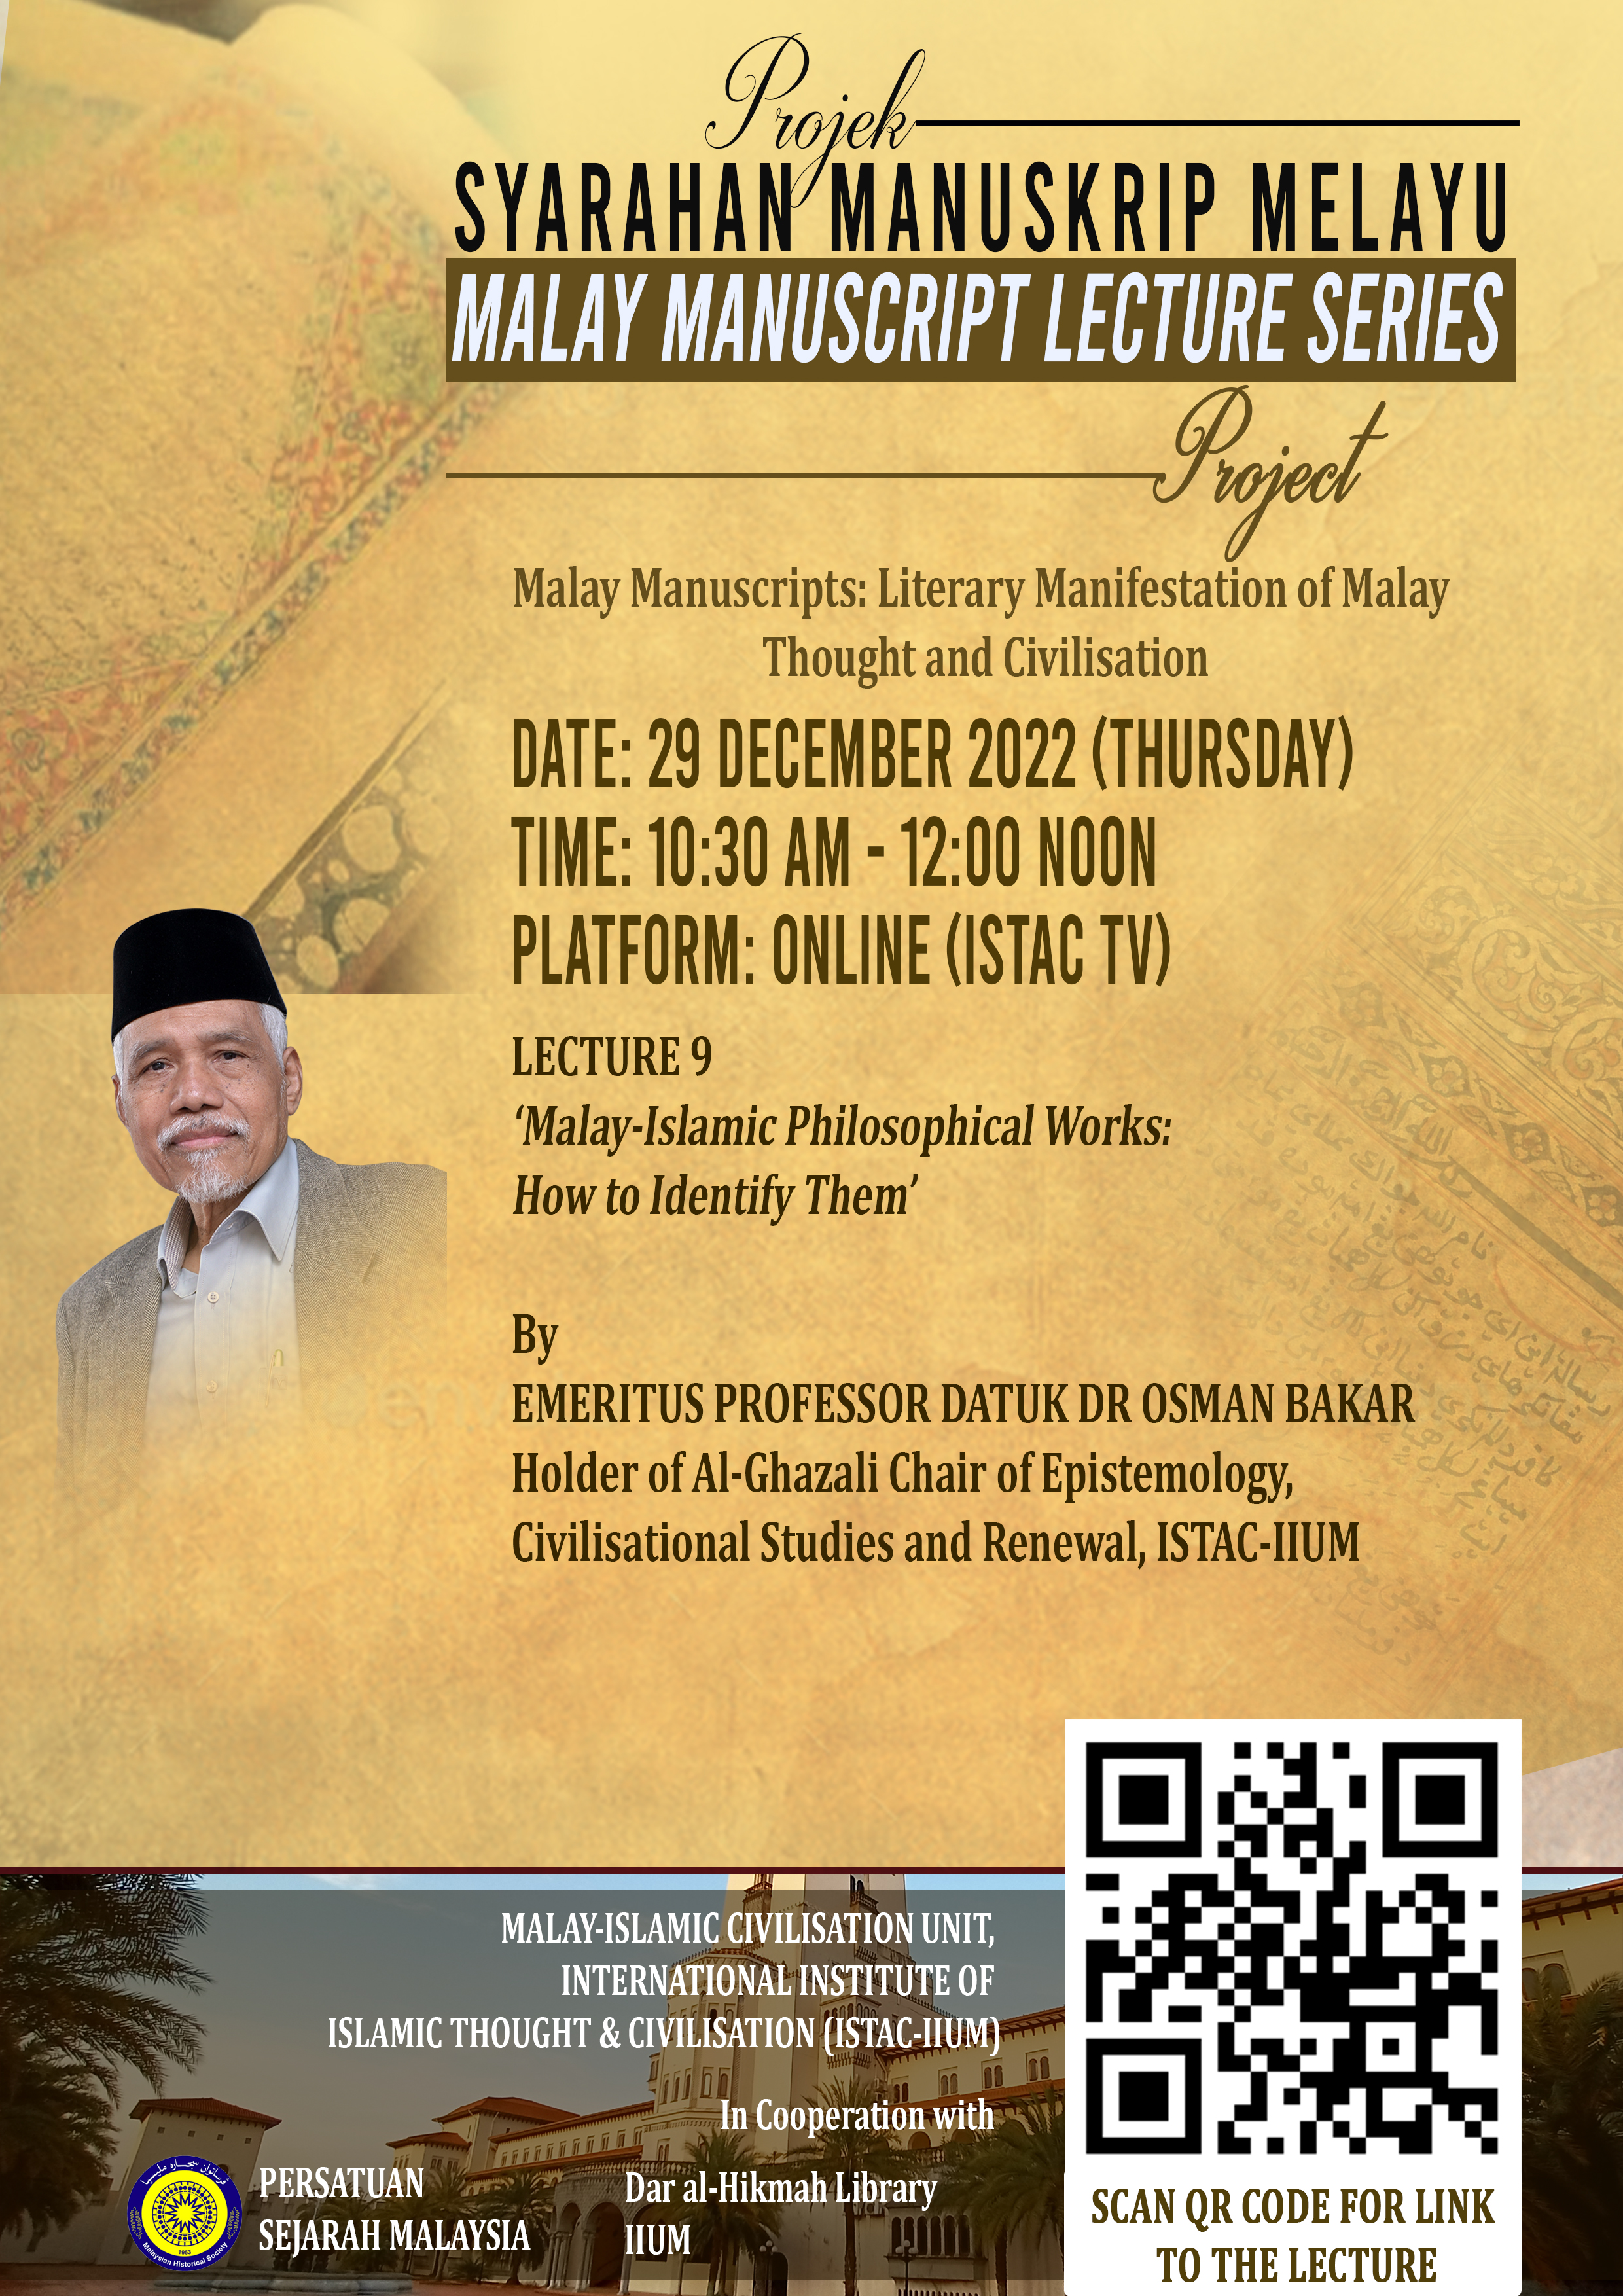 MALAY MANUSCRIPT LECTURE SERIES PROJECT_LECTURE 9